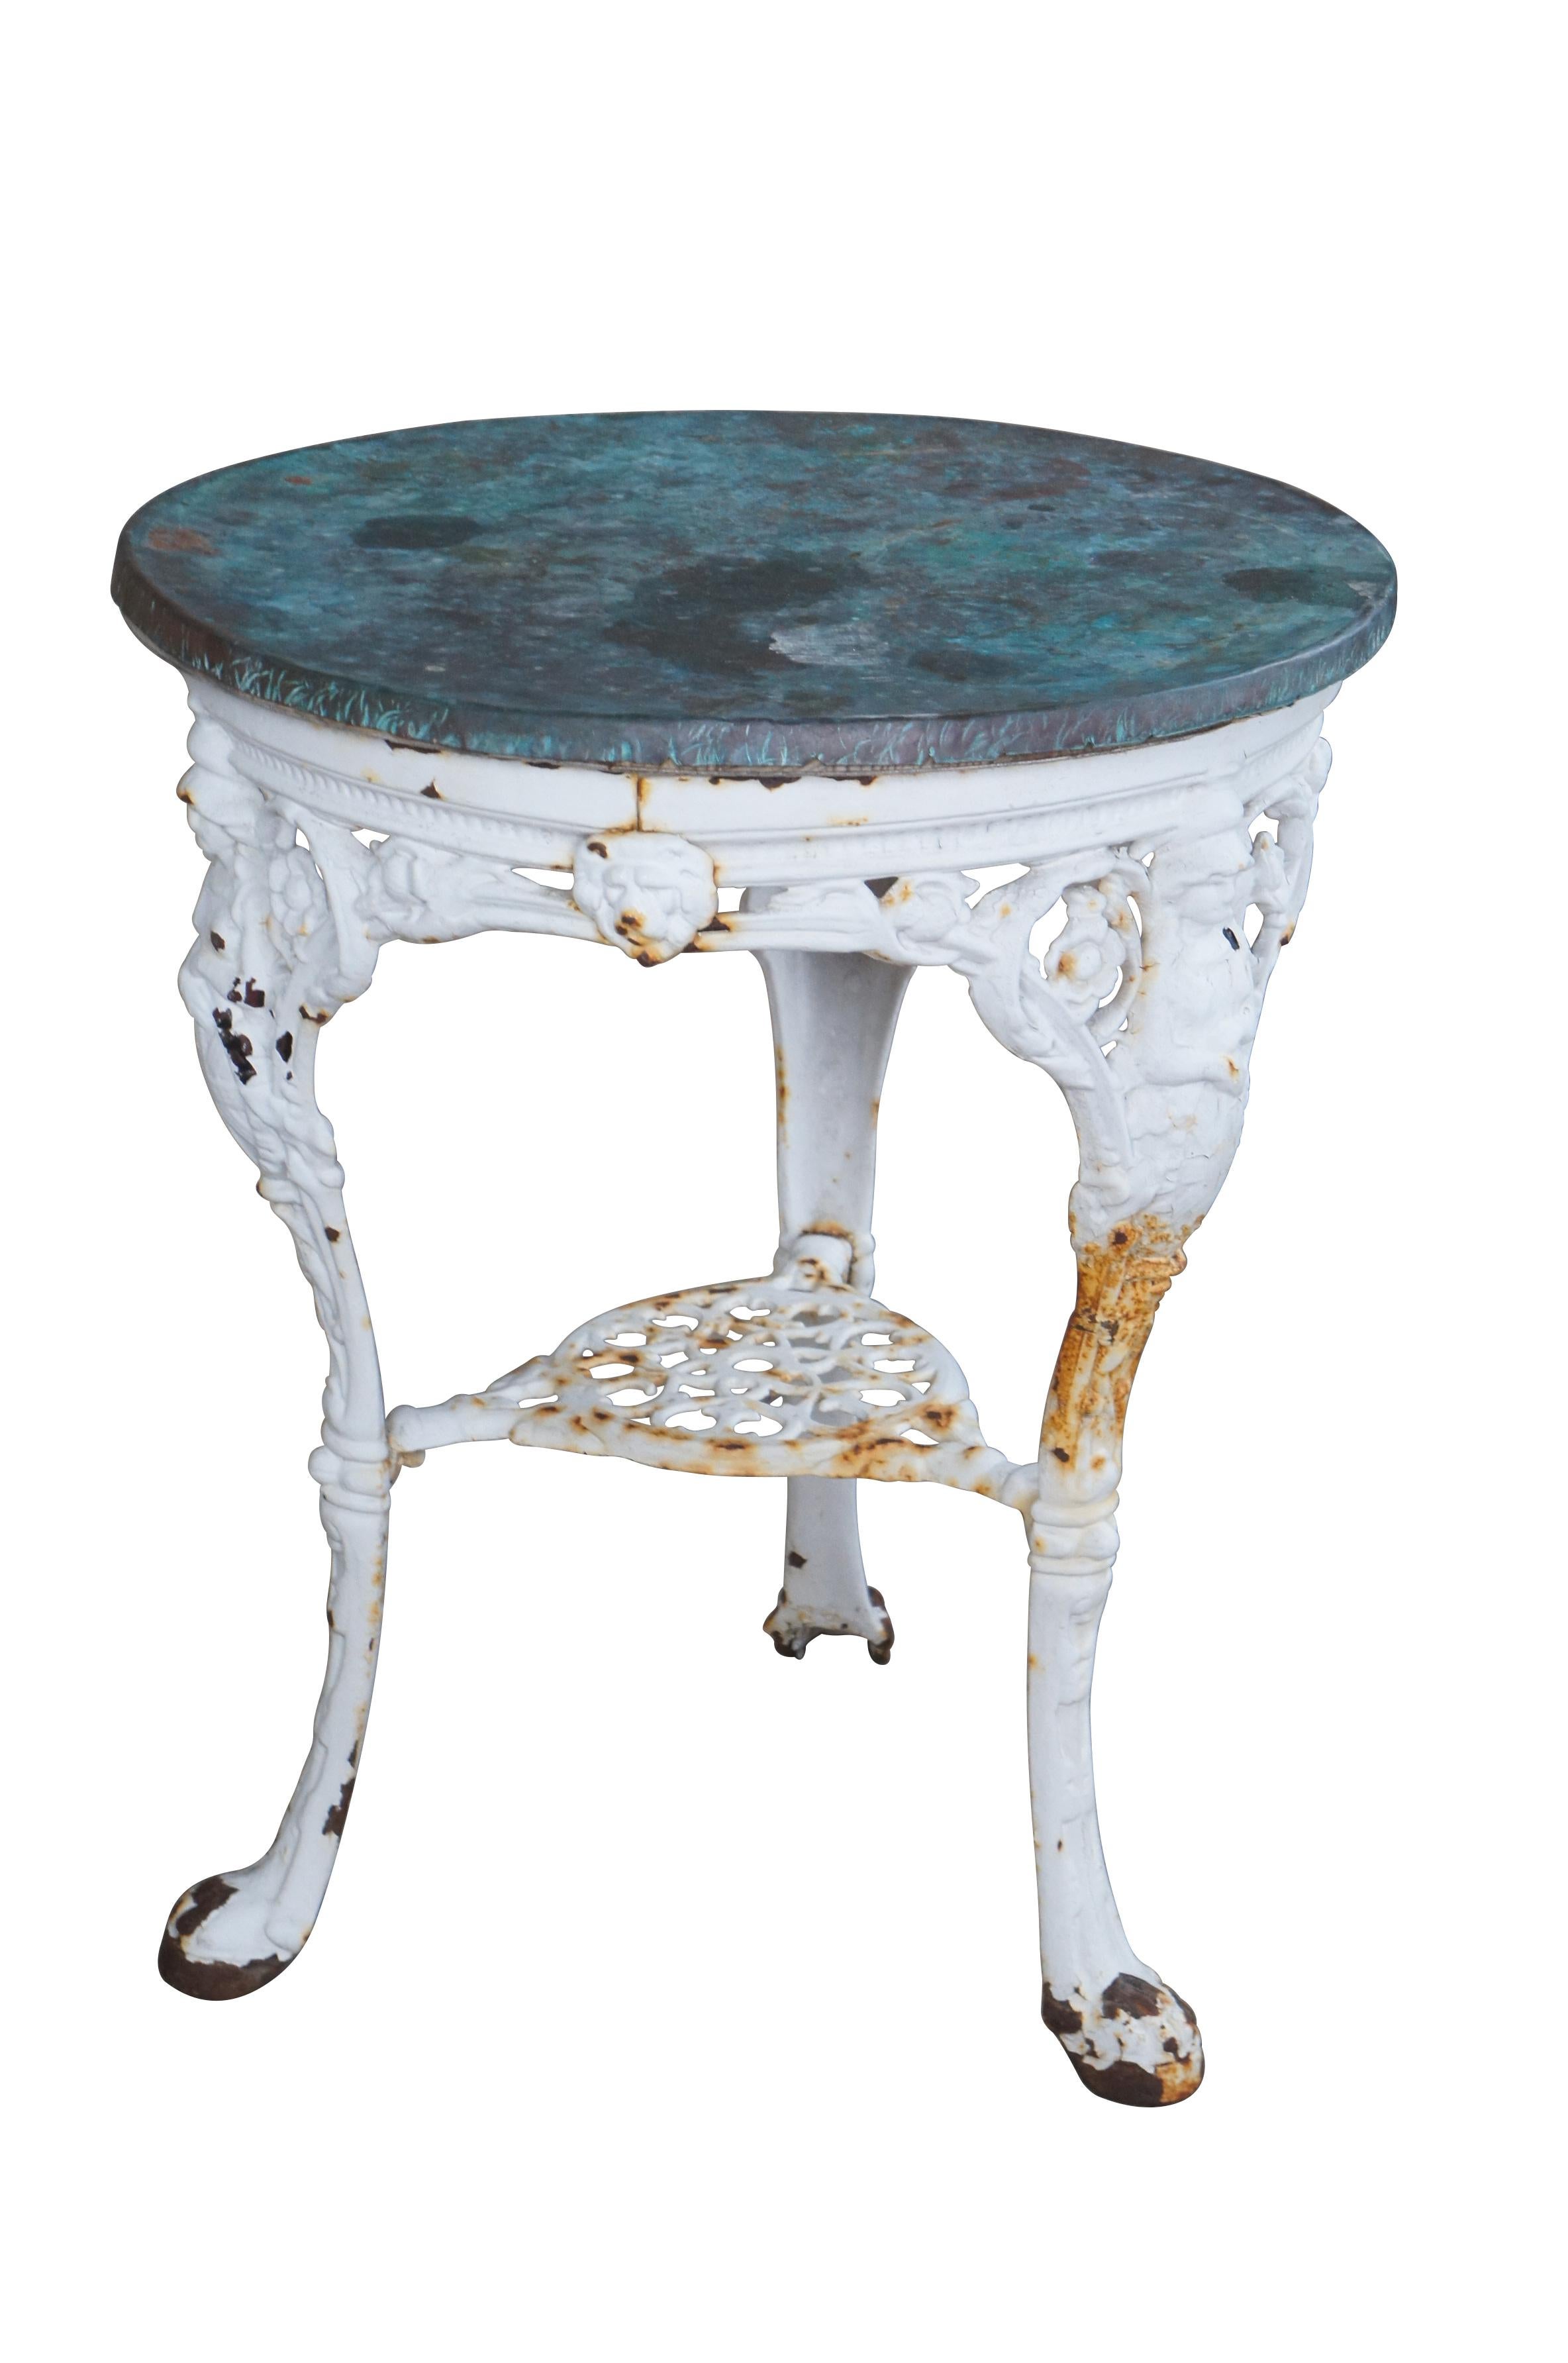 Antique Victorian garden table featuring heavy cast iron base with reticulated floral / lion head / figural motif with round copper lined top.  Three upper legs have a figural 